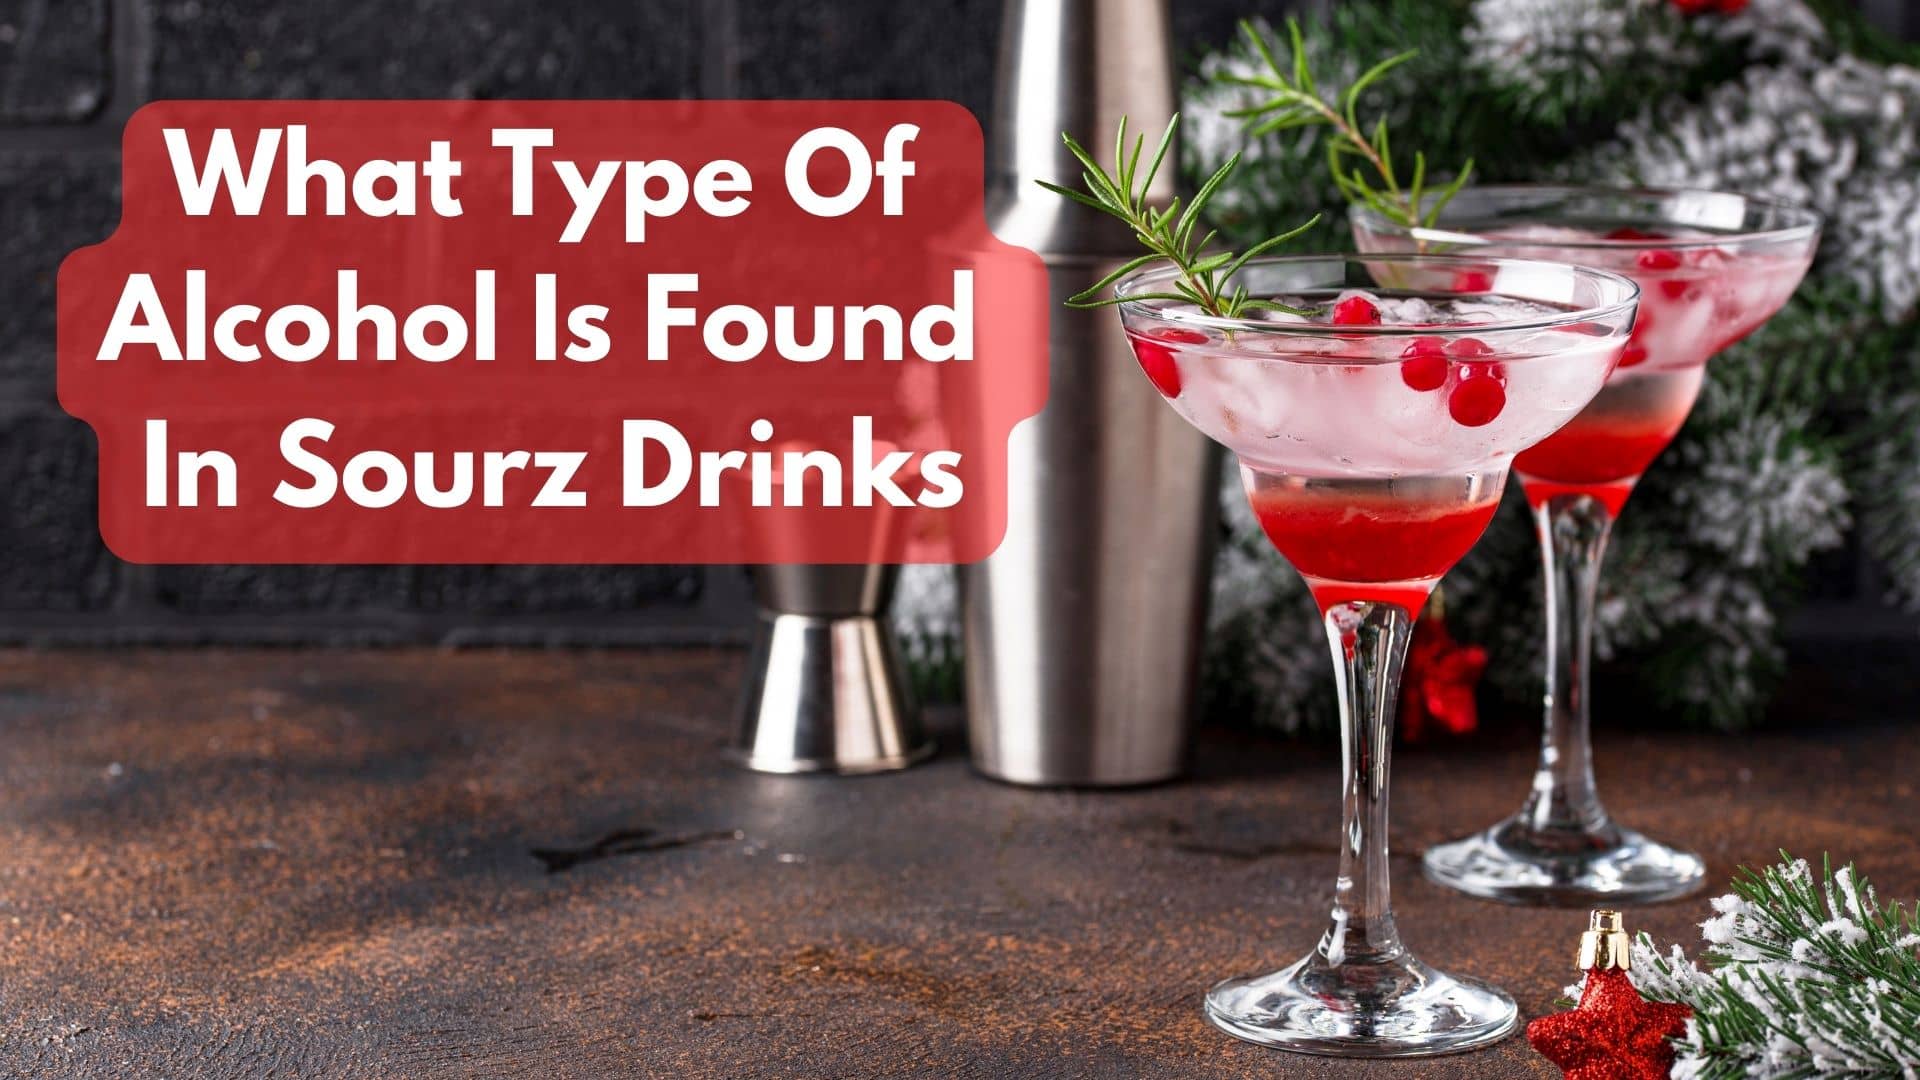 What Type Of Alcohol Is Found In Sourz Drinks